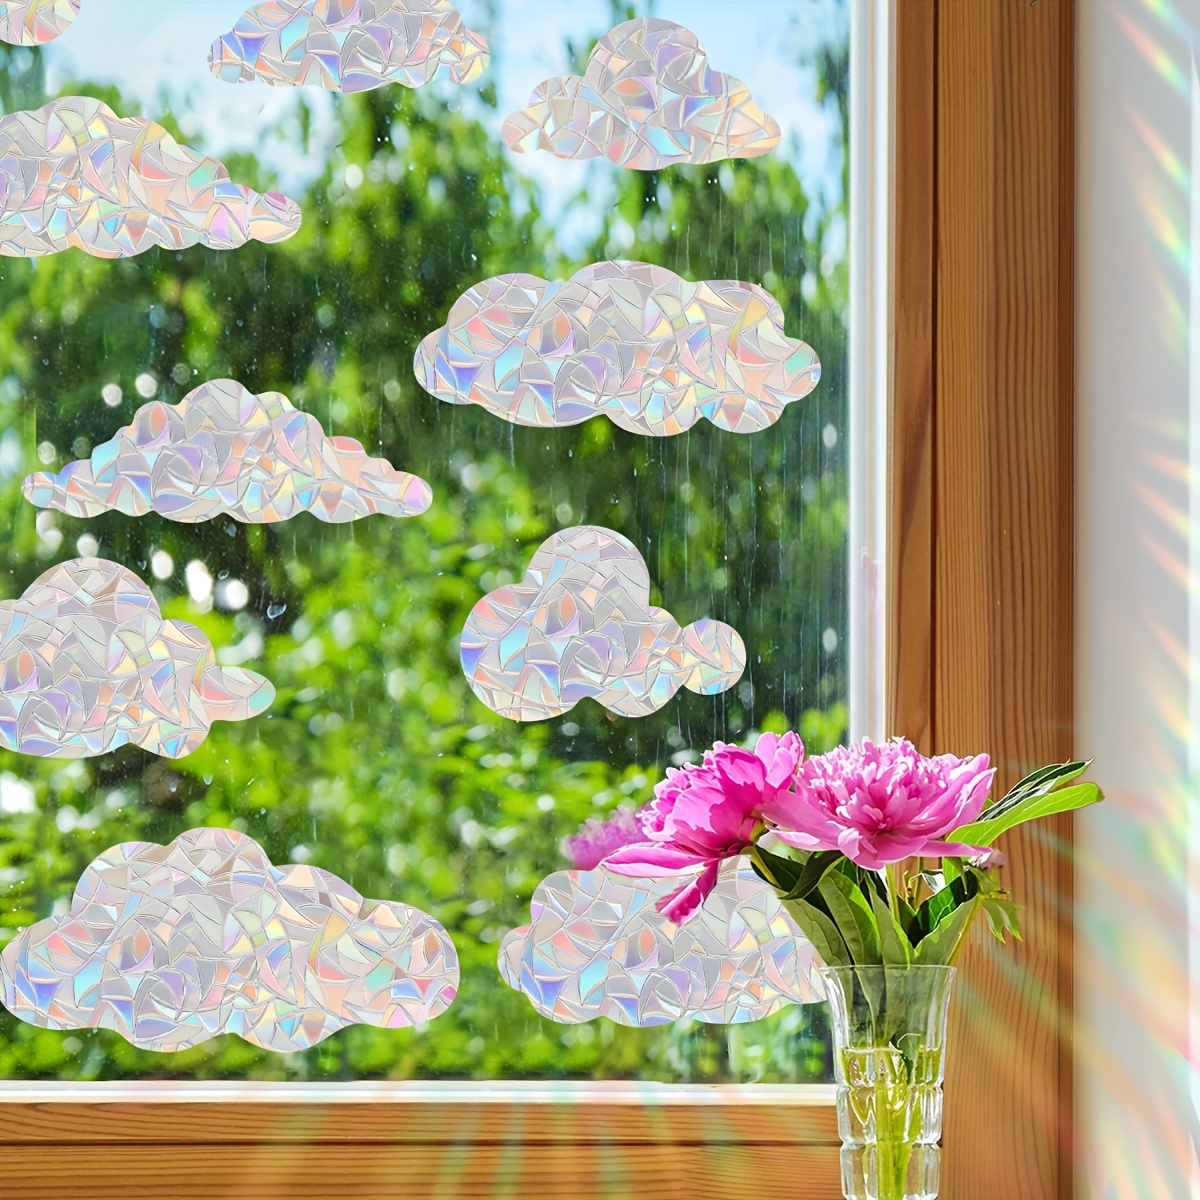 

Classic Cloud Window Stickers - 16 Piece Set, Rainbow Electrostatic Cling Decals, Pvc Material, Reusable Rectangle Shape With Semi-glossy Finish, Bird Collision Prevention, 16mil Thickness